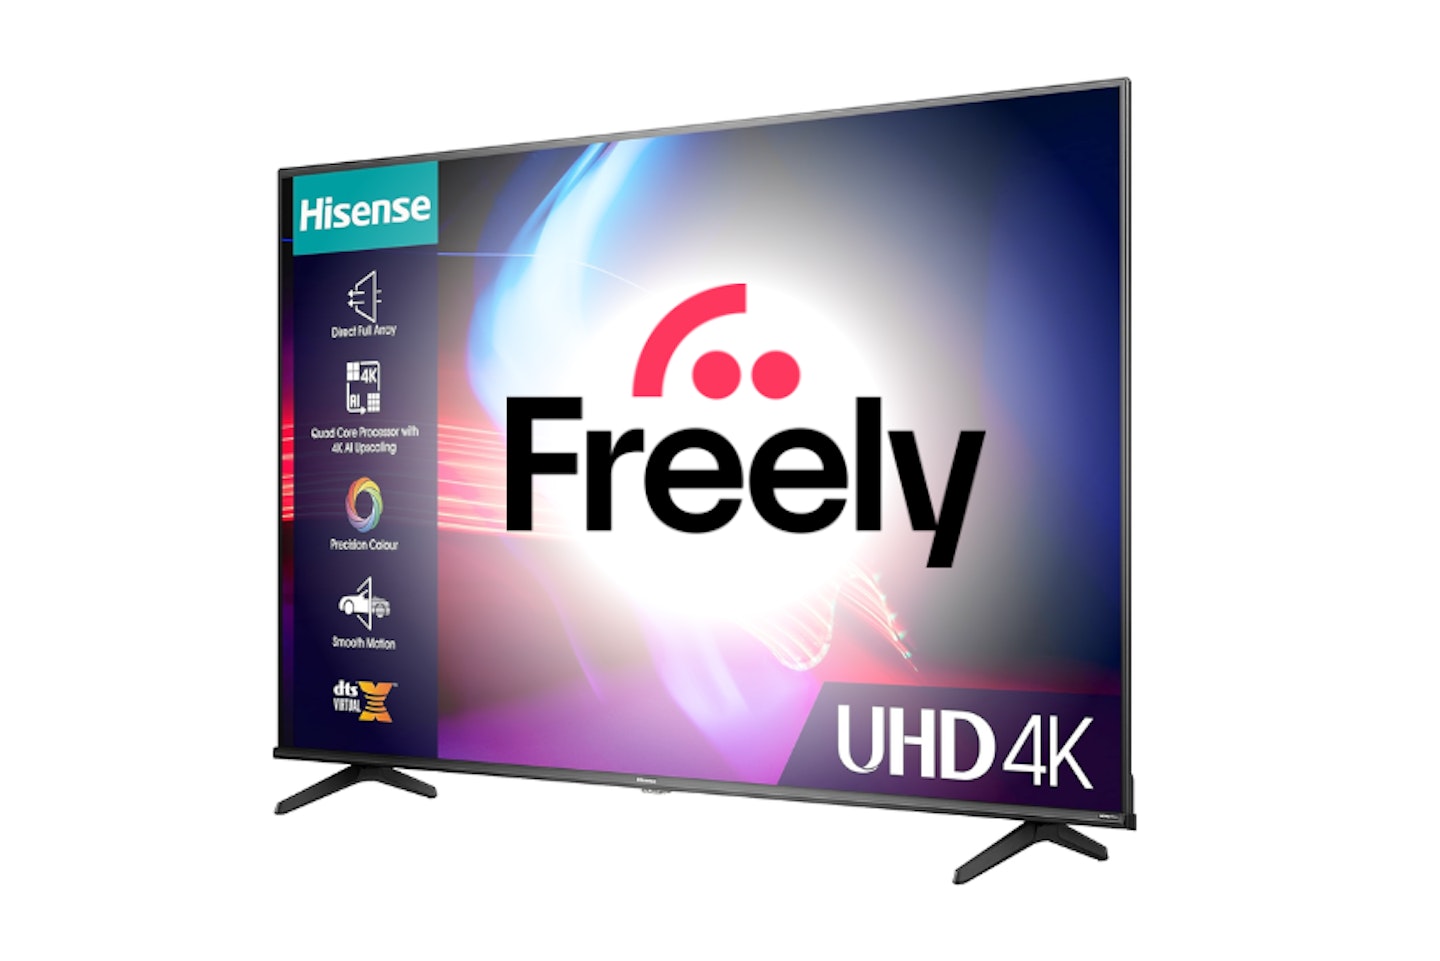 A HISENSE TV WITH THE FREELY LOGO